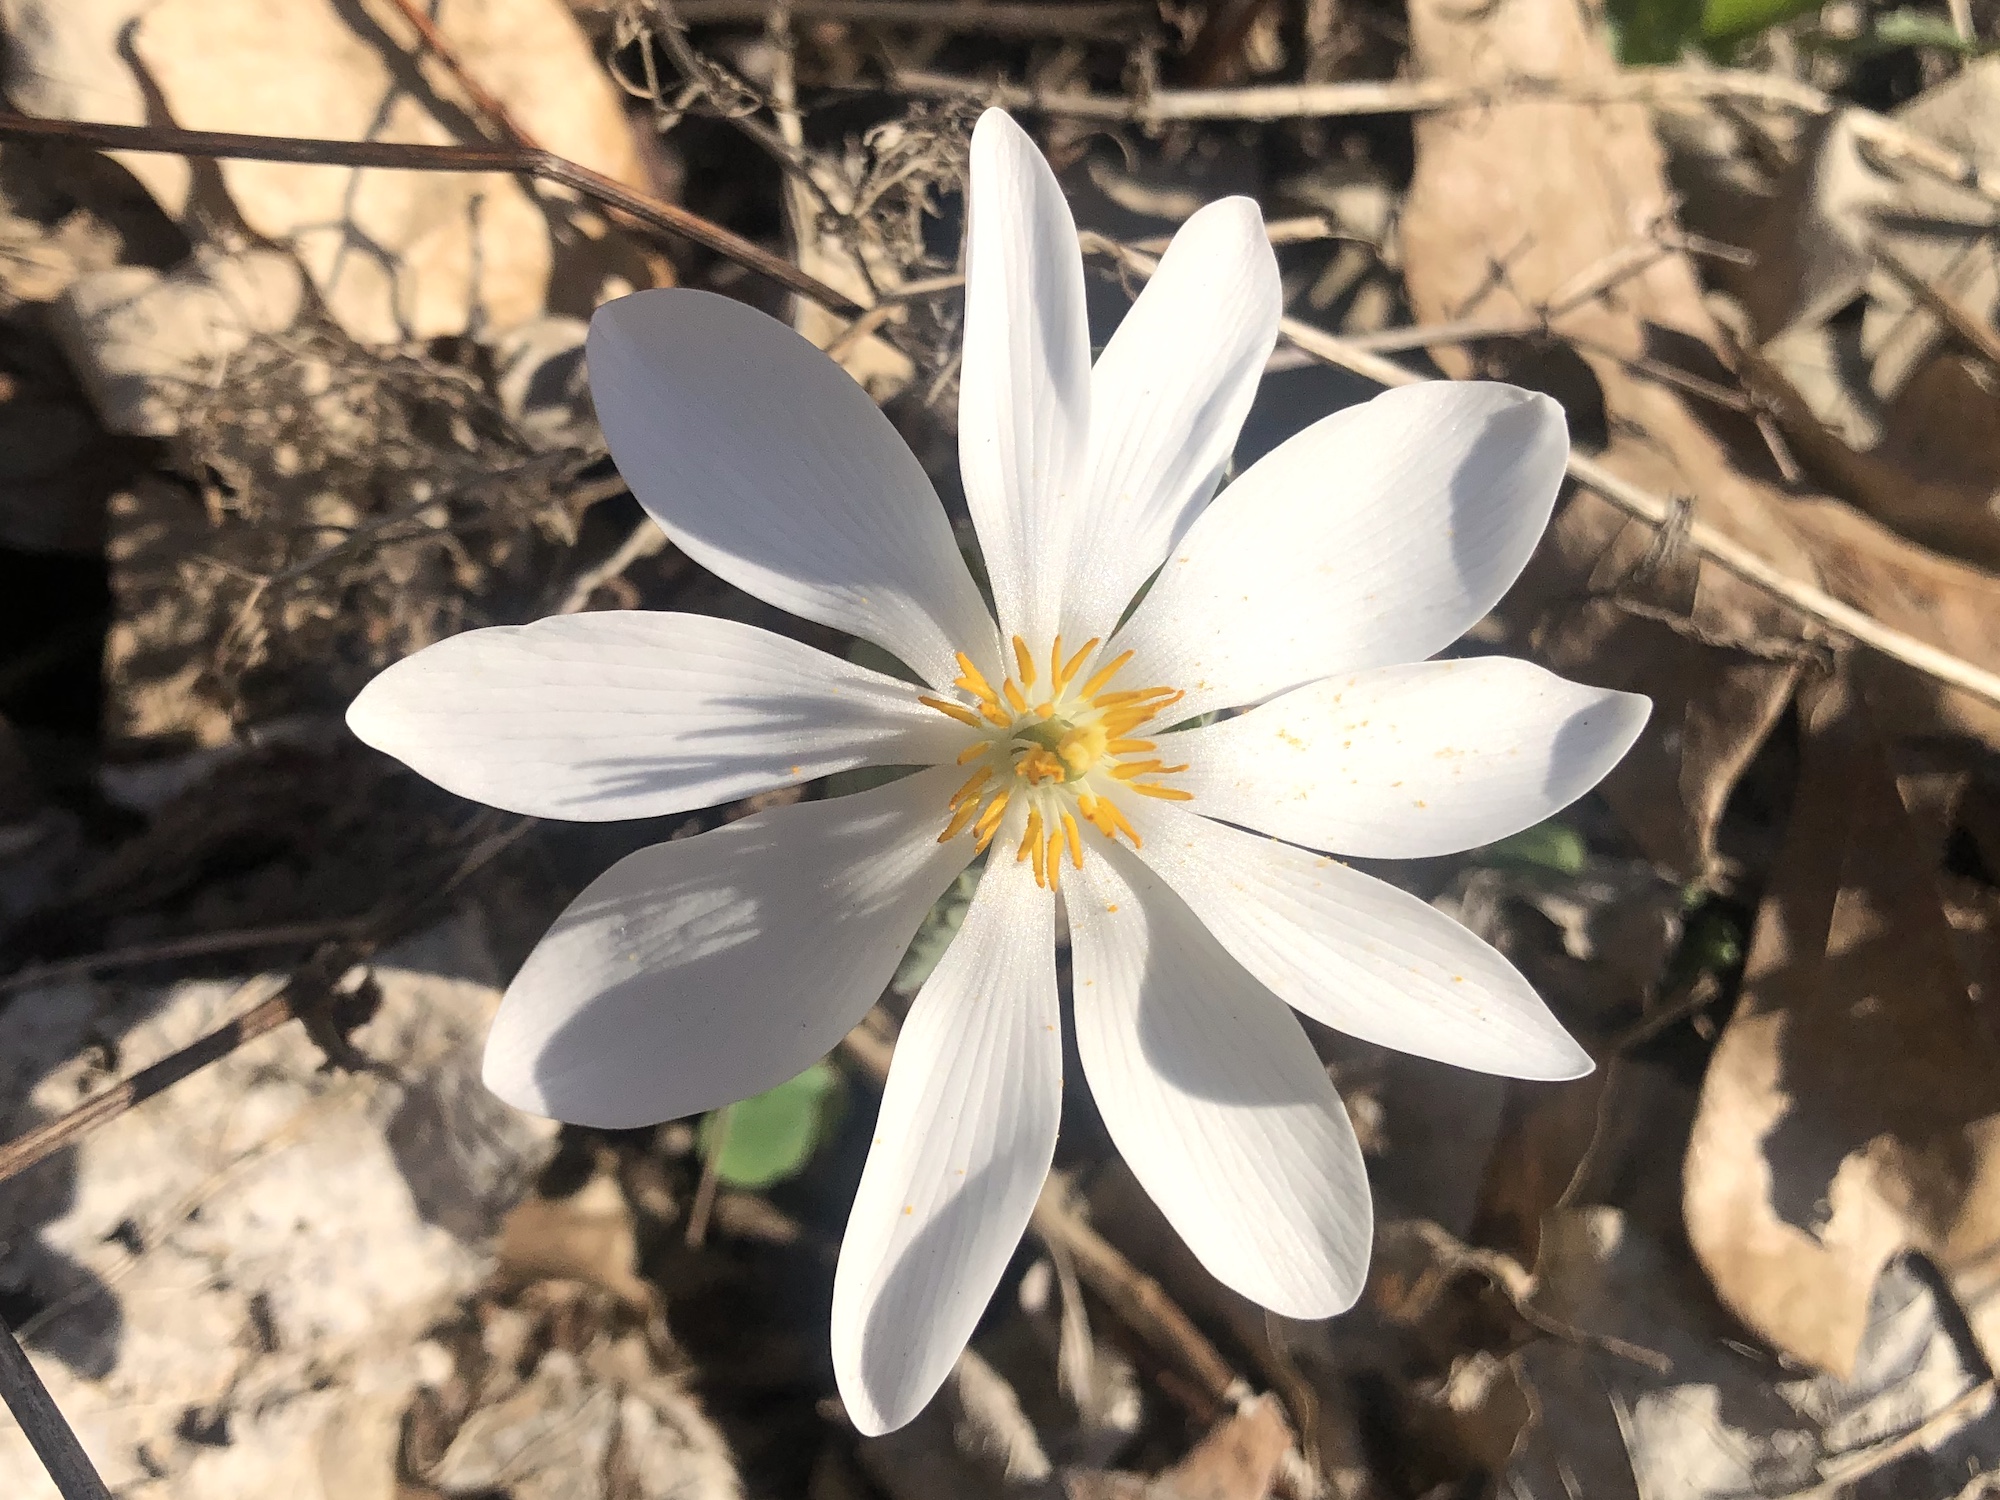 Bloodroot in Oak Savanna by Council Ring in Madison, Wisconsin on April 13, 2023.